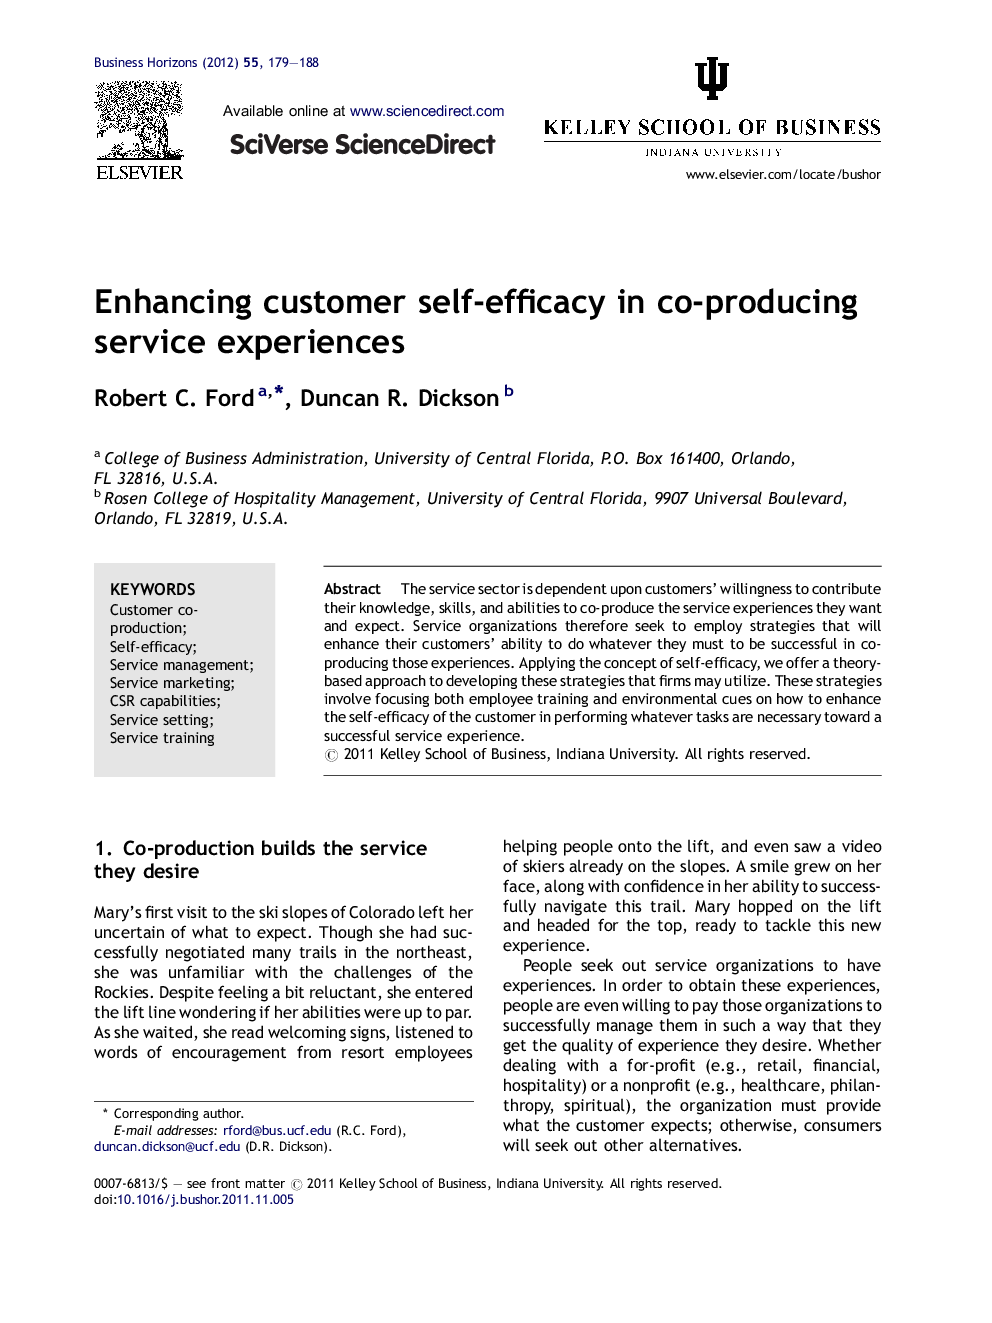 Enhancing customer self-efficacy in co-producing service experiences